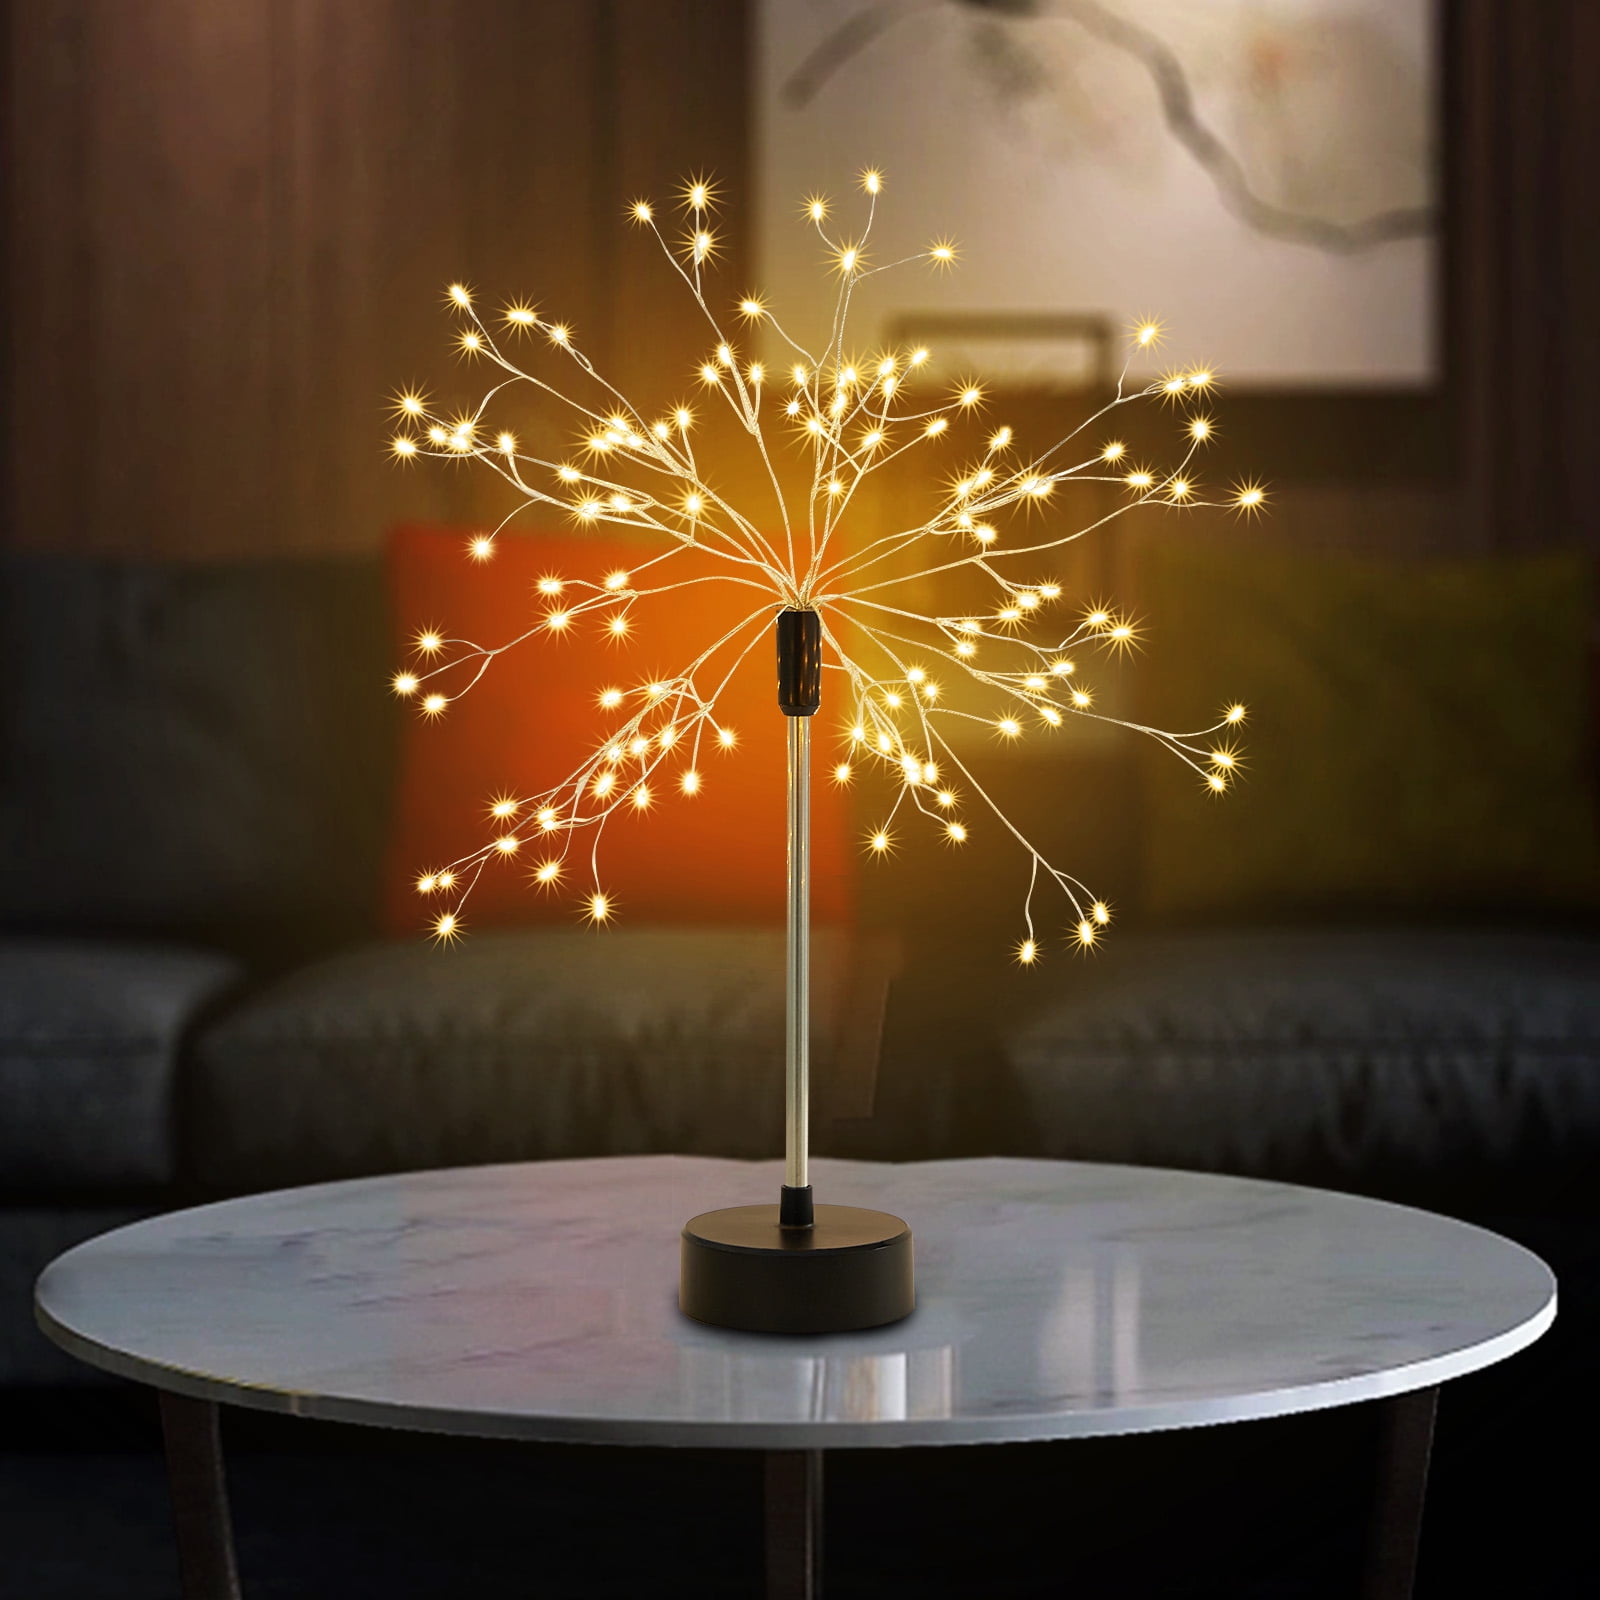 Lapalife LED Firework Table Lamp, USB Battery Powered Desk Lamp for Bedroom  8 Modes Dimmable Starburst Fairy Lights Spirit Tree with Remote for Party